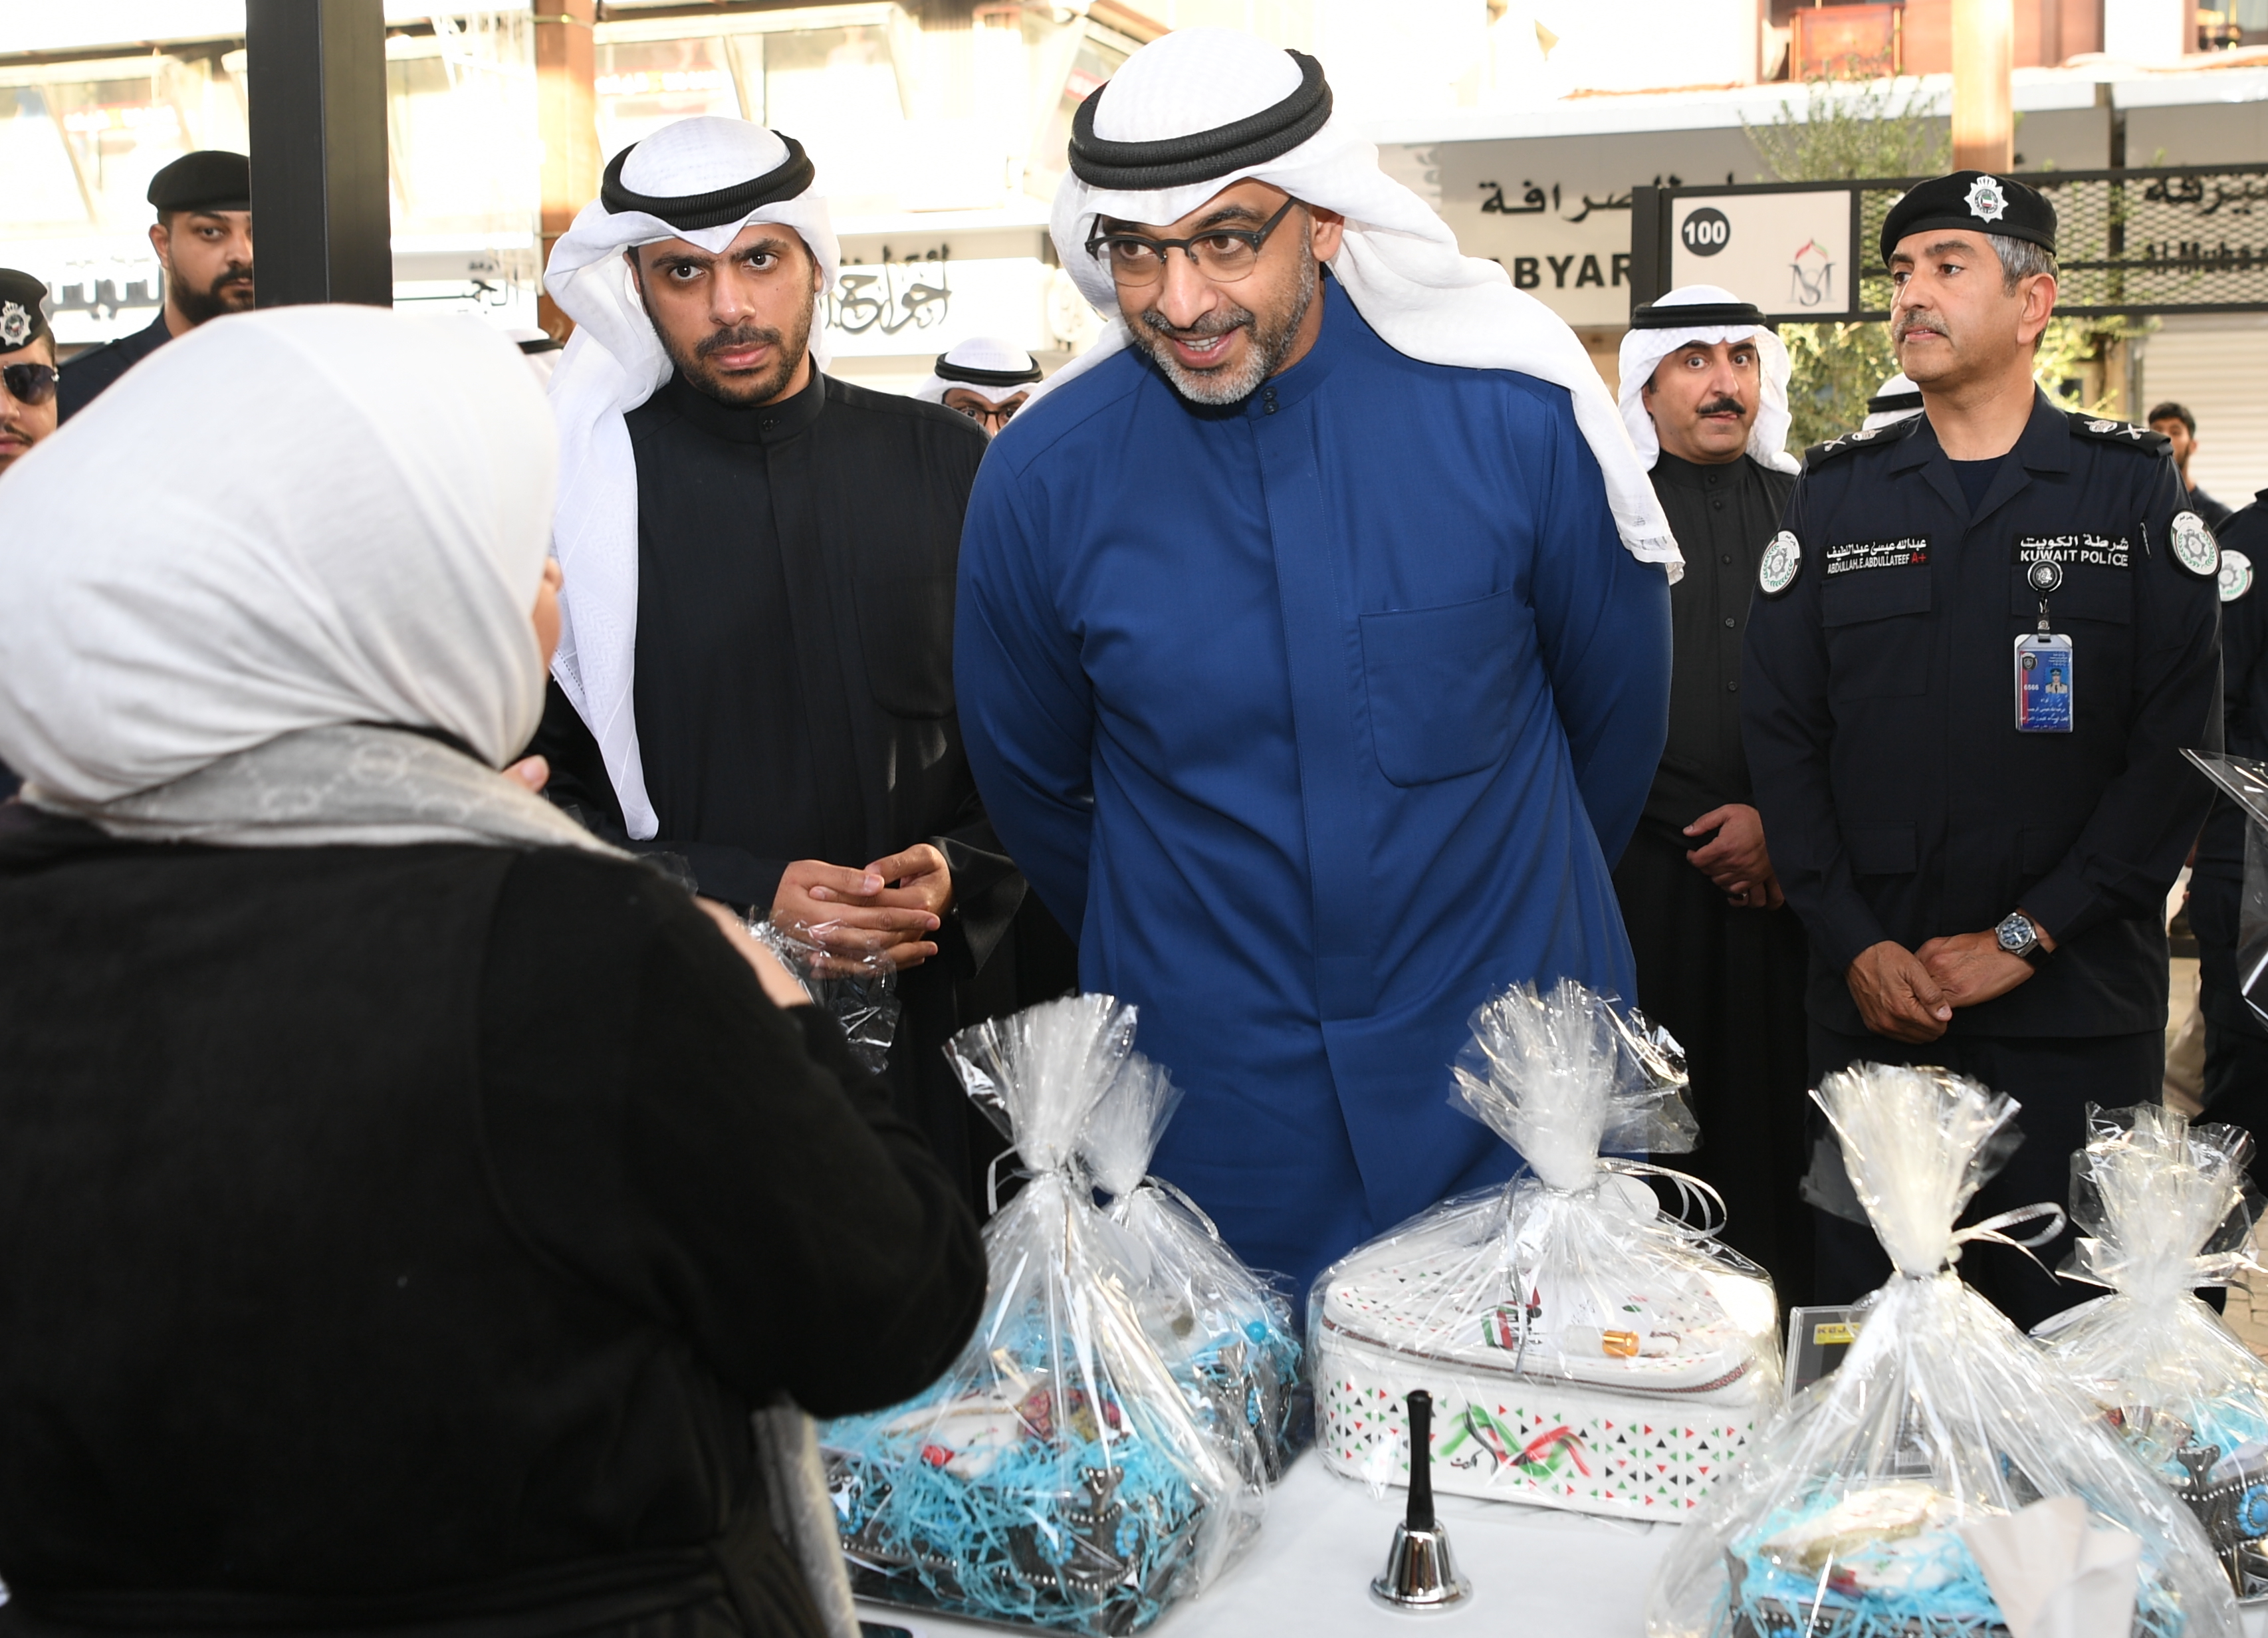 His Highness the Amir's Representative, the Minister of Amiri Diwan Affairs Sheikh Mohammad Abdullah Al-Mubarak Al-Sabah attended the opening ceremony